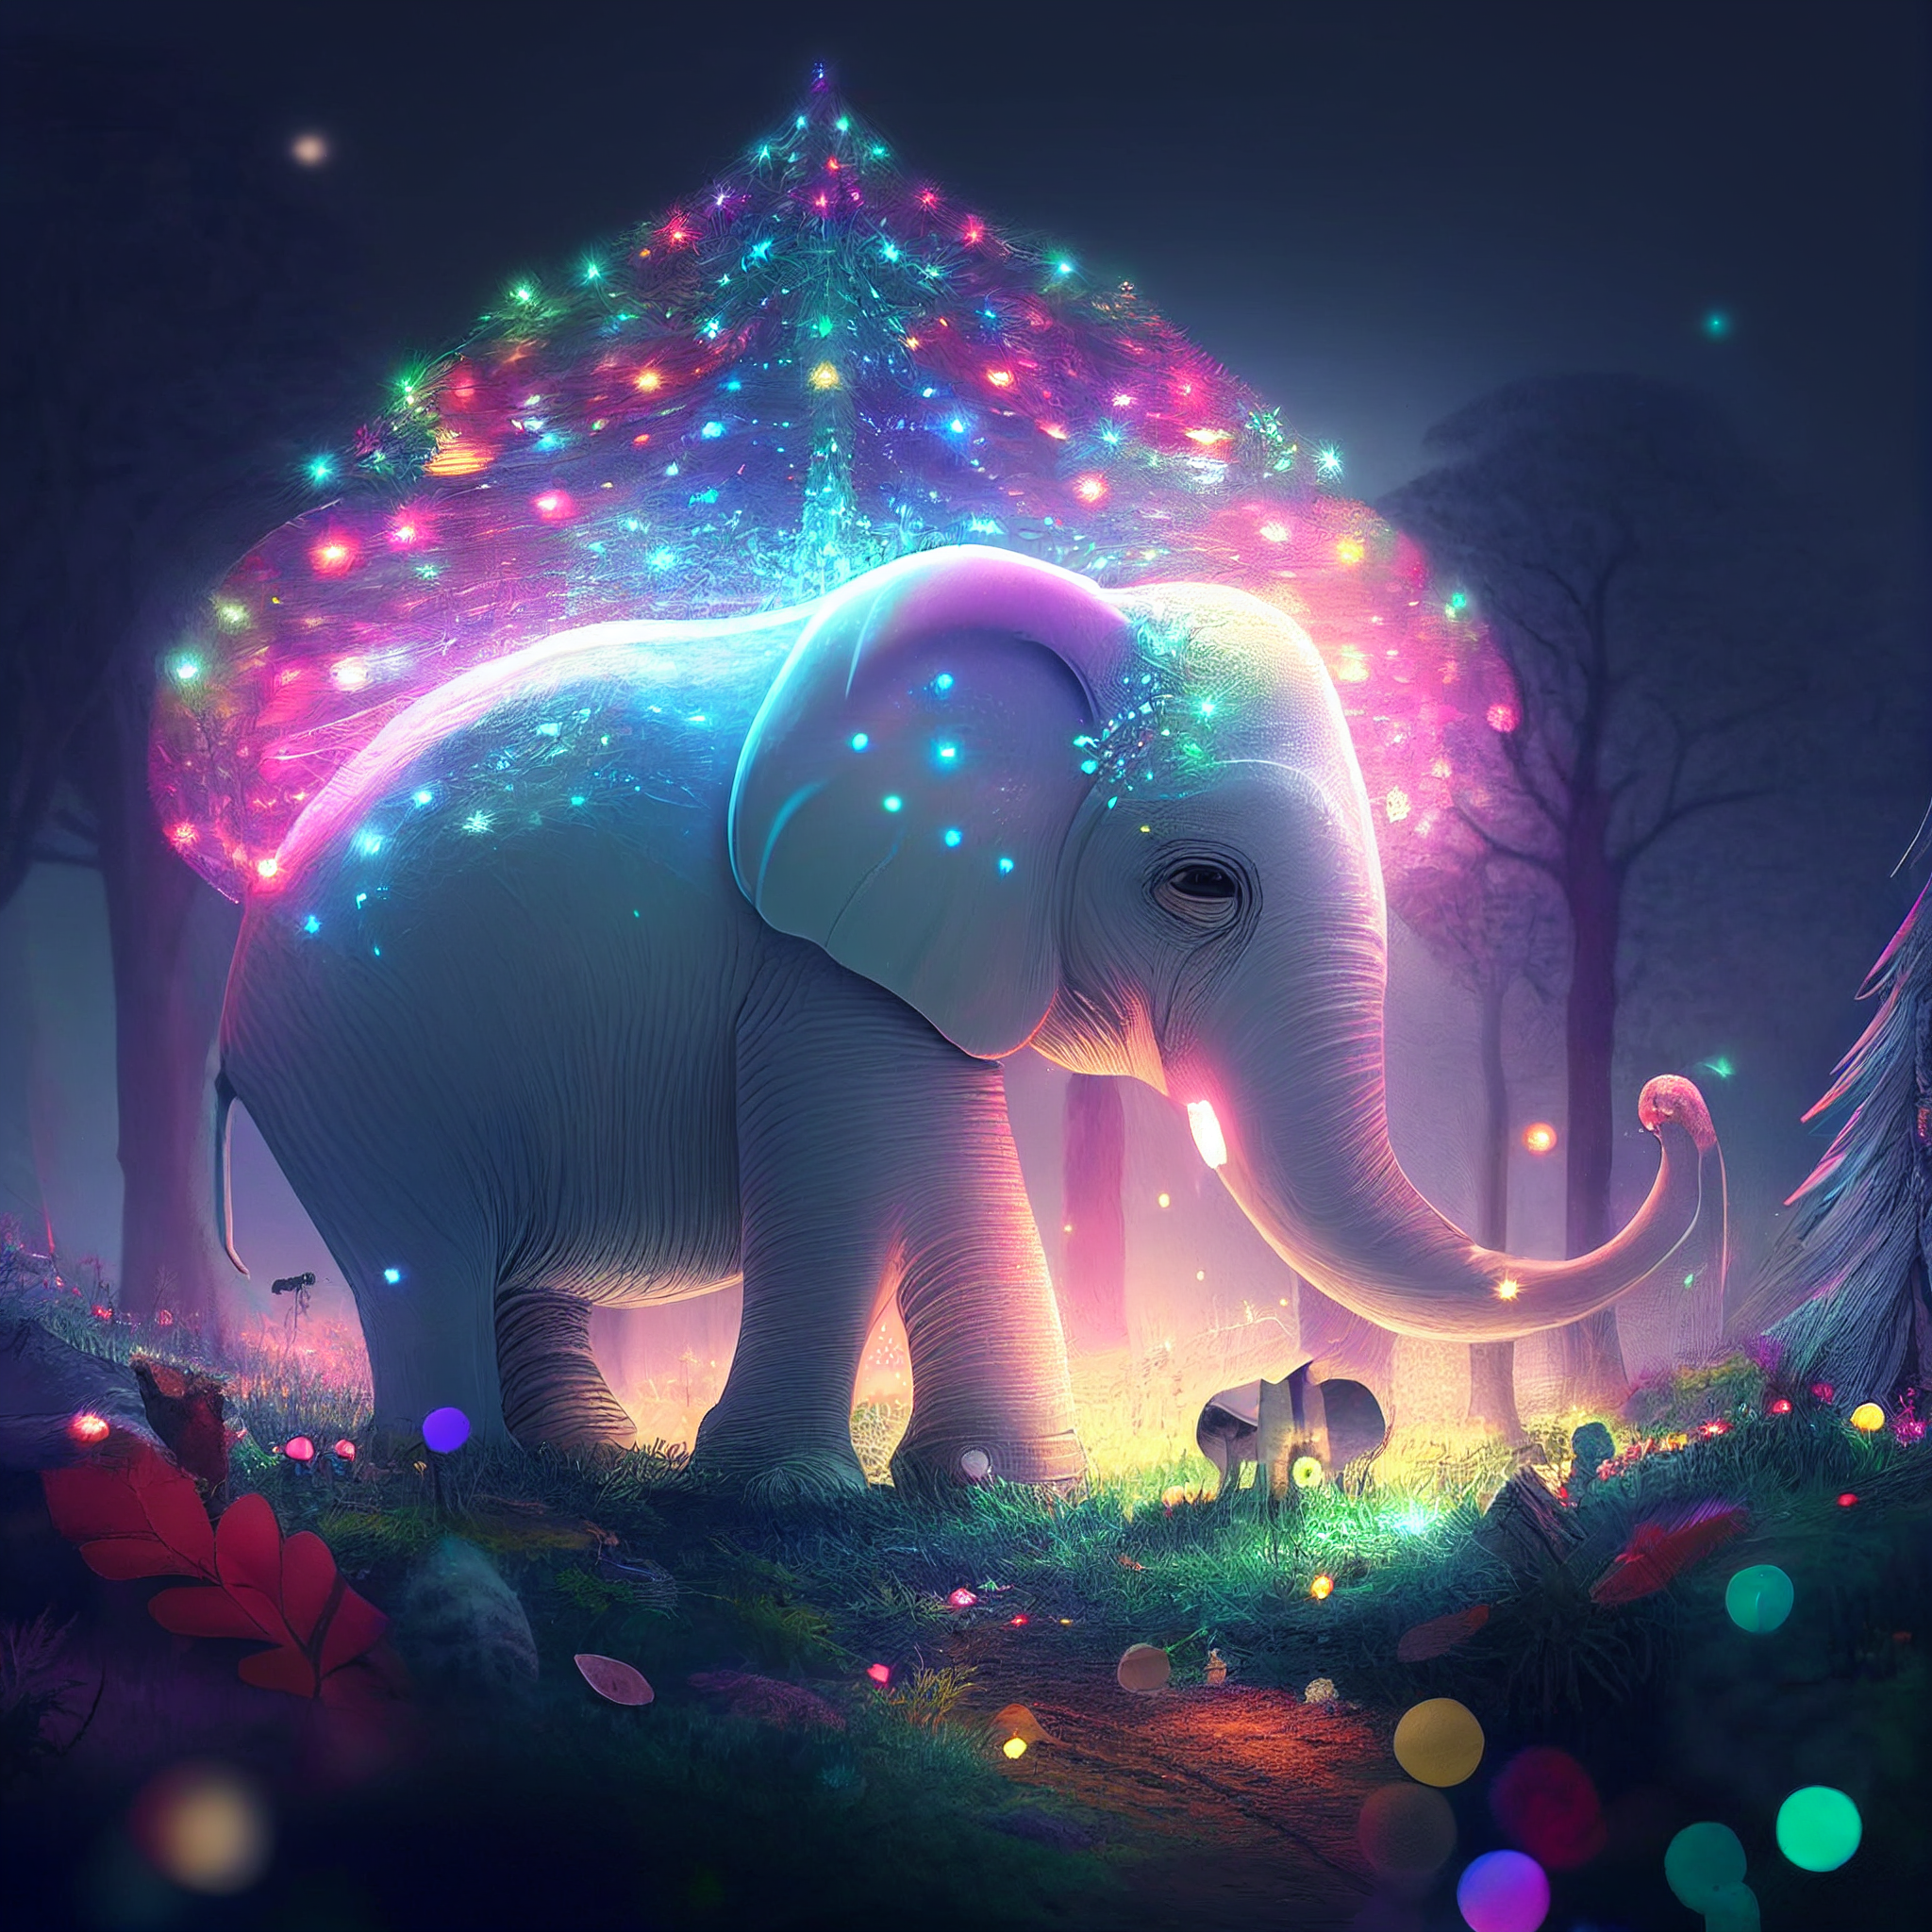 AI image generation White elephant in fairytale forest